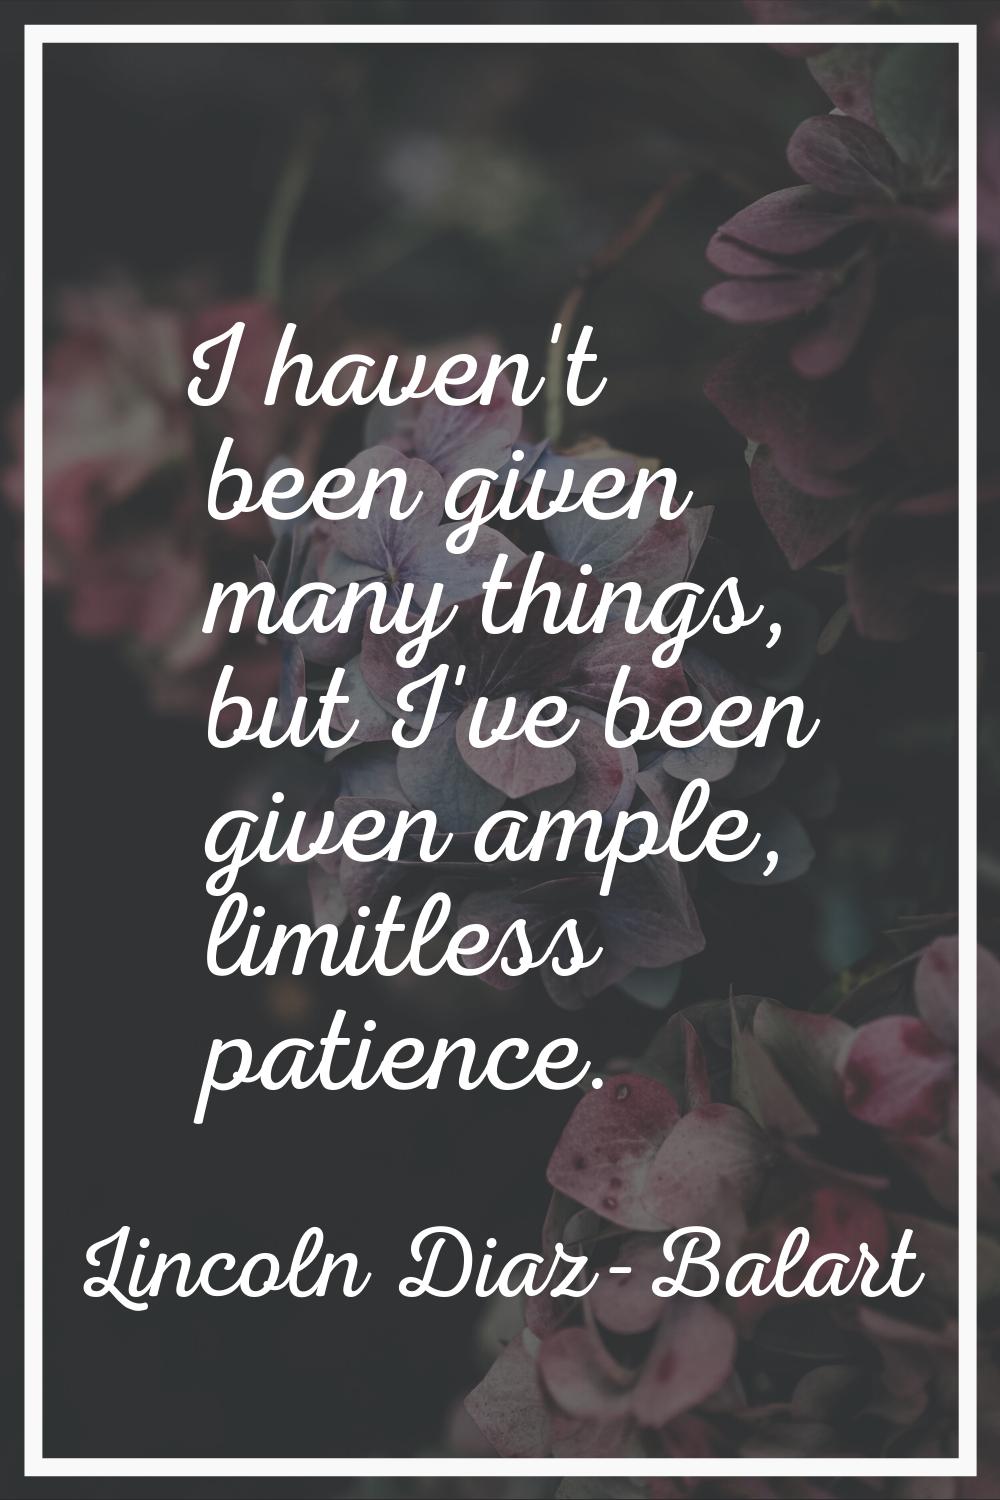 I haven't been given many things, but I've been given ample, limitless patience.